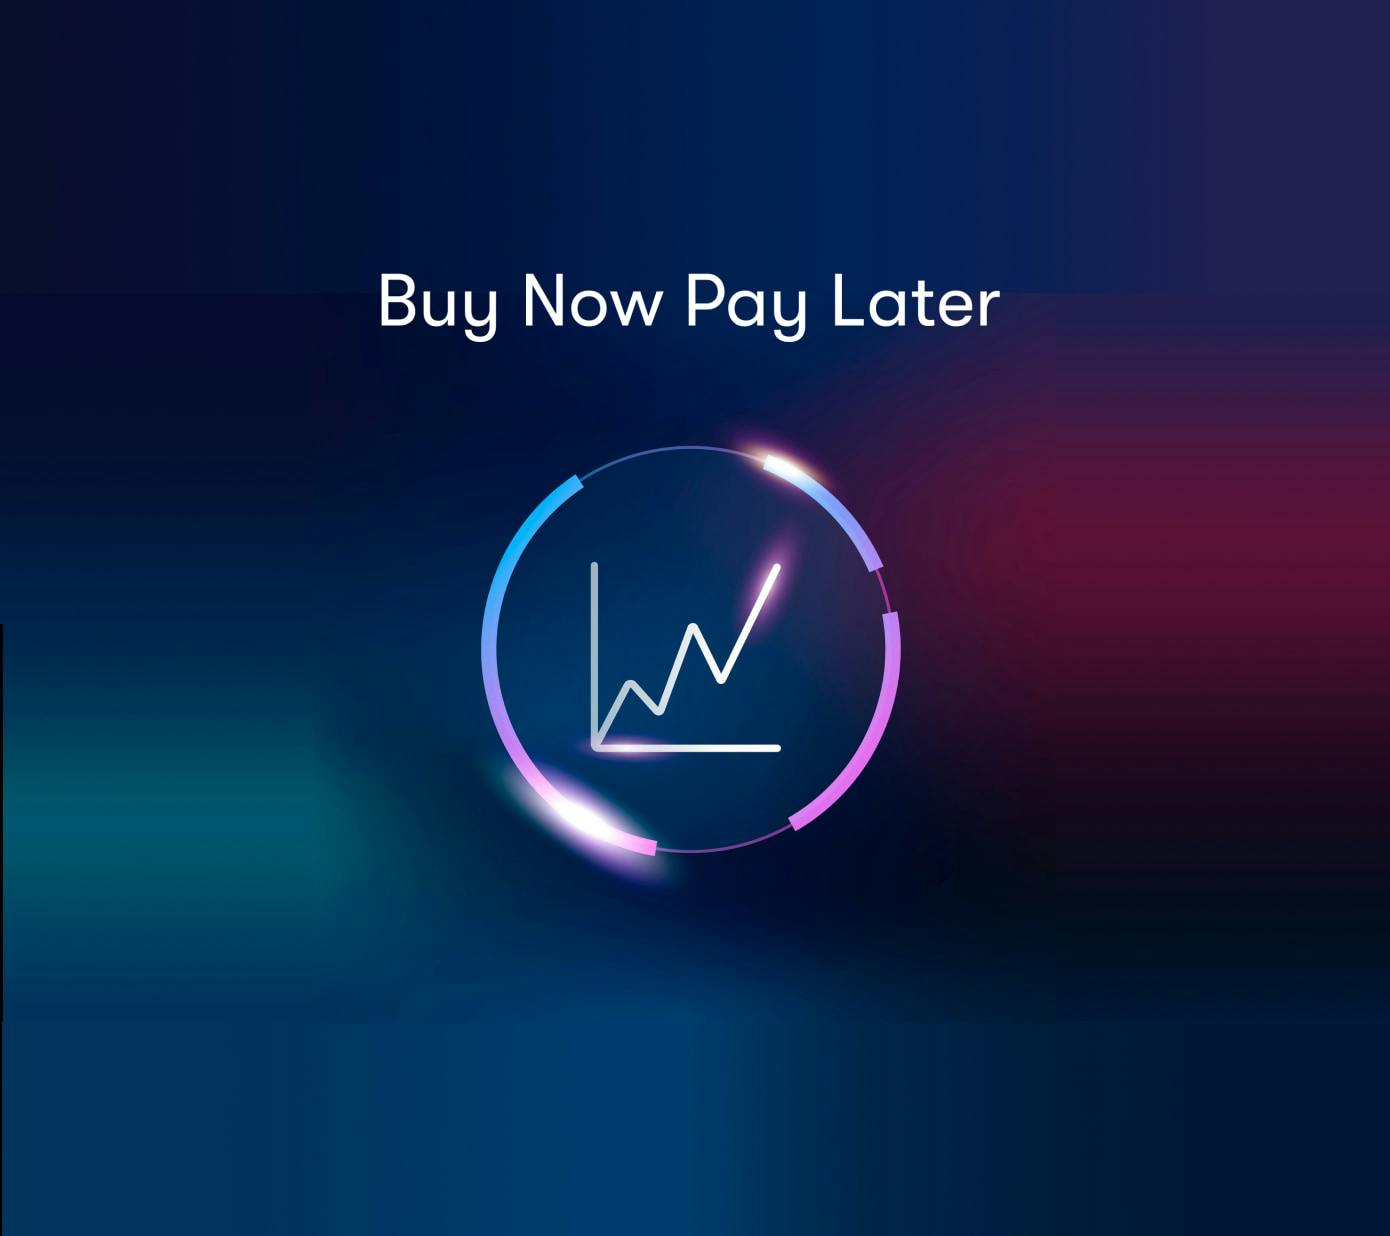 buy now pay later BNPL